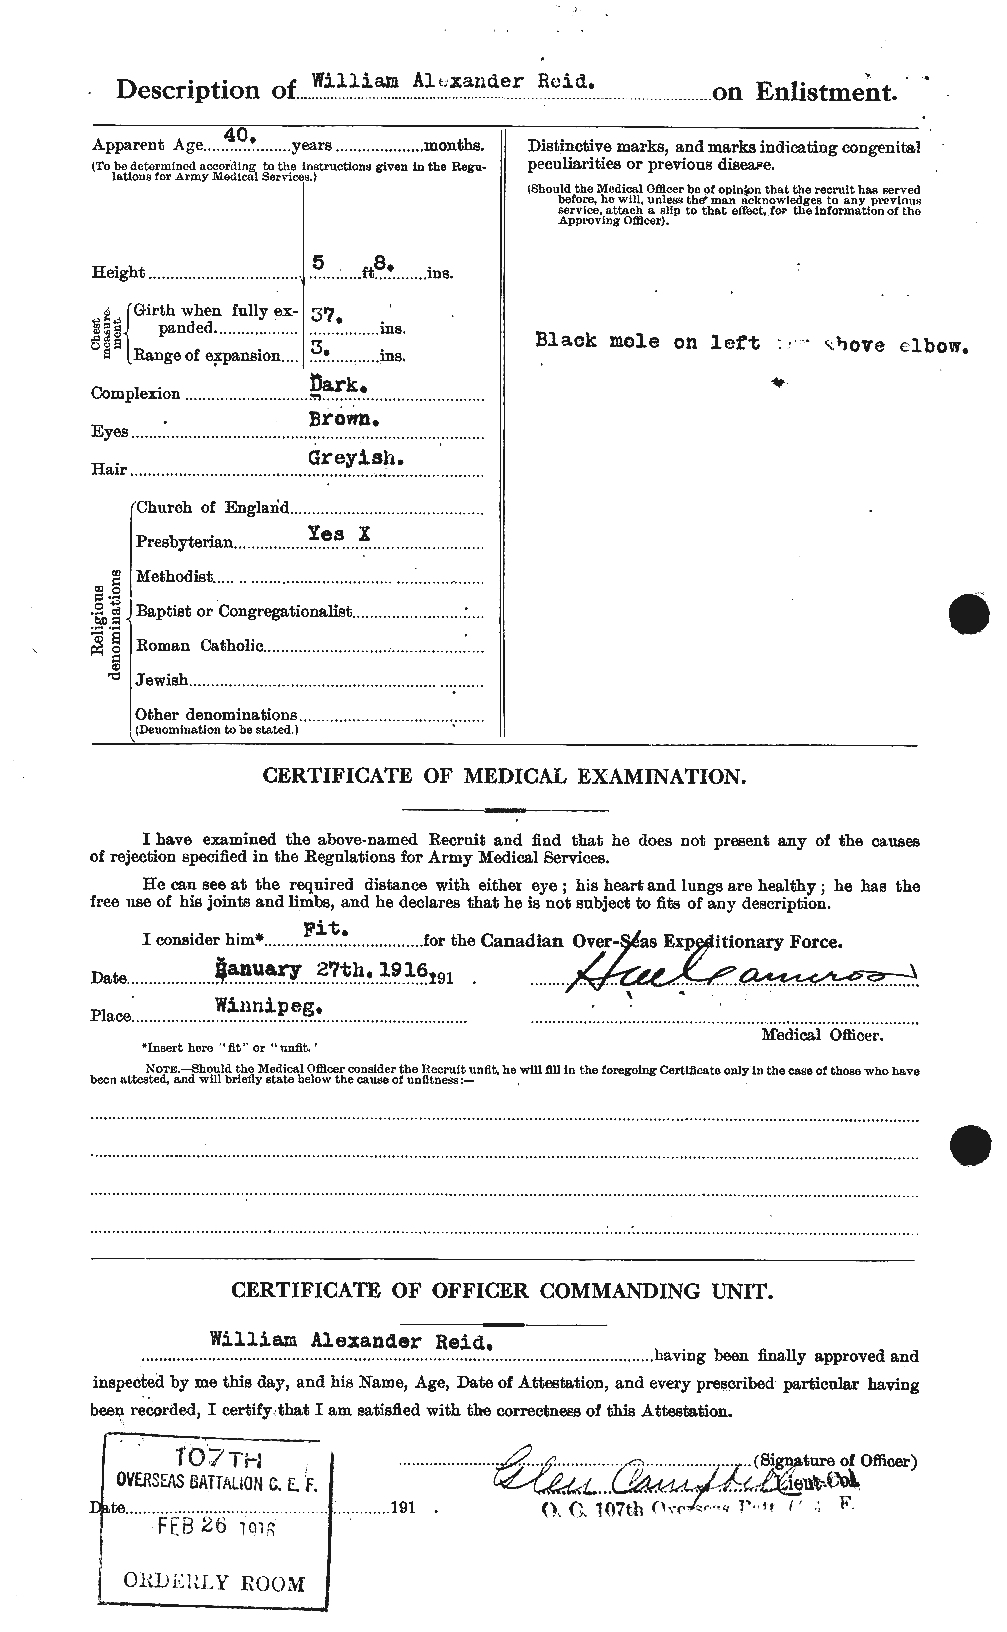 Personnel Records of the First World War - CEF 596959b